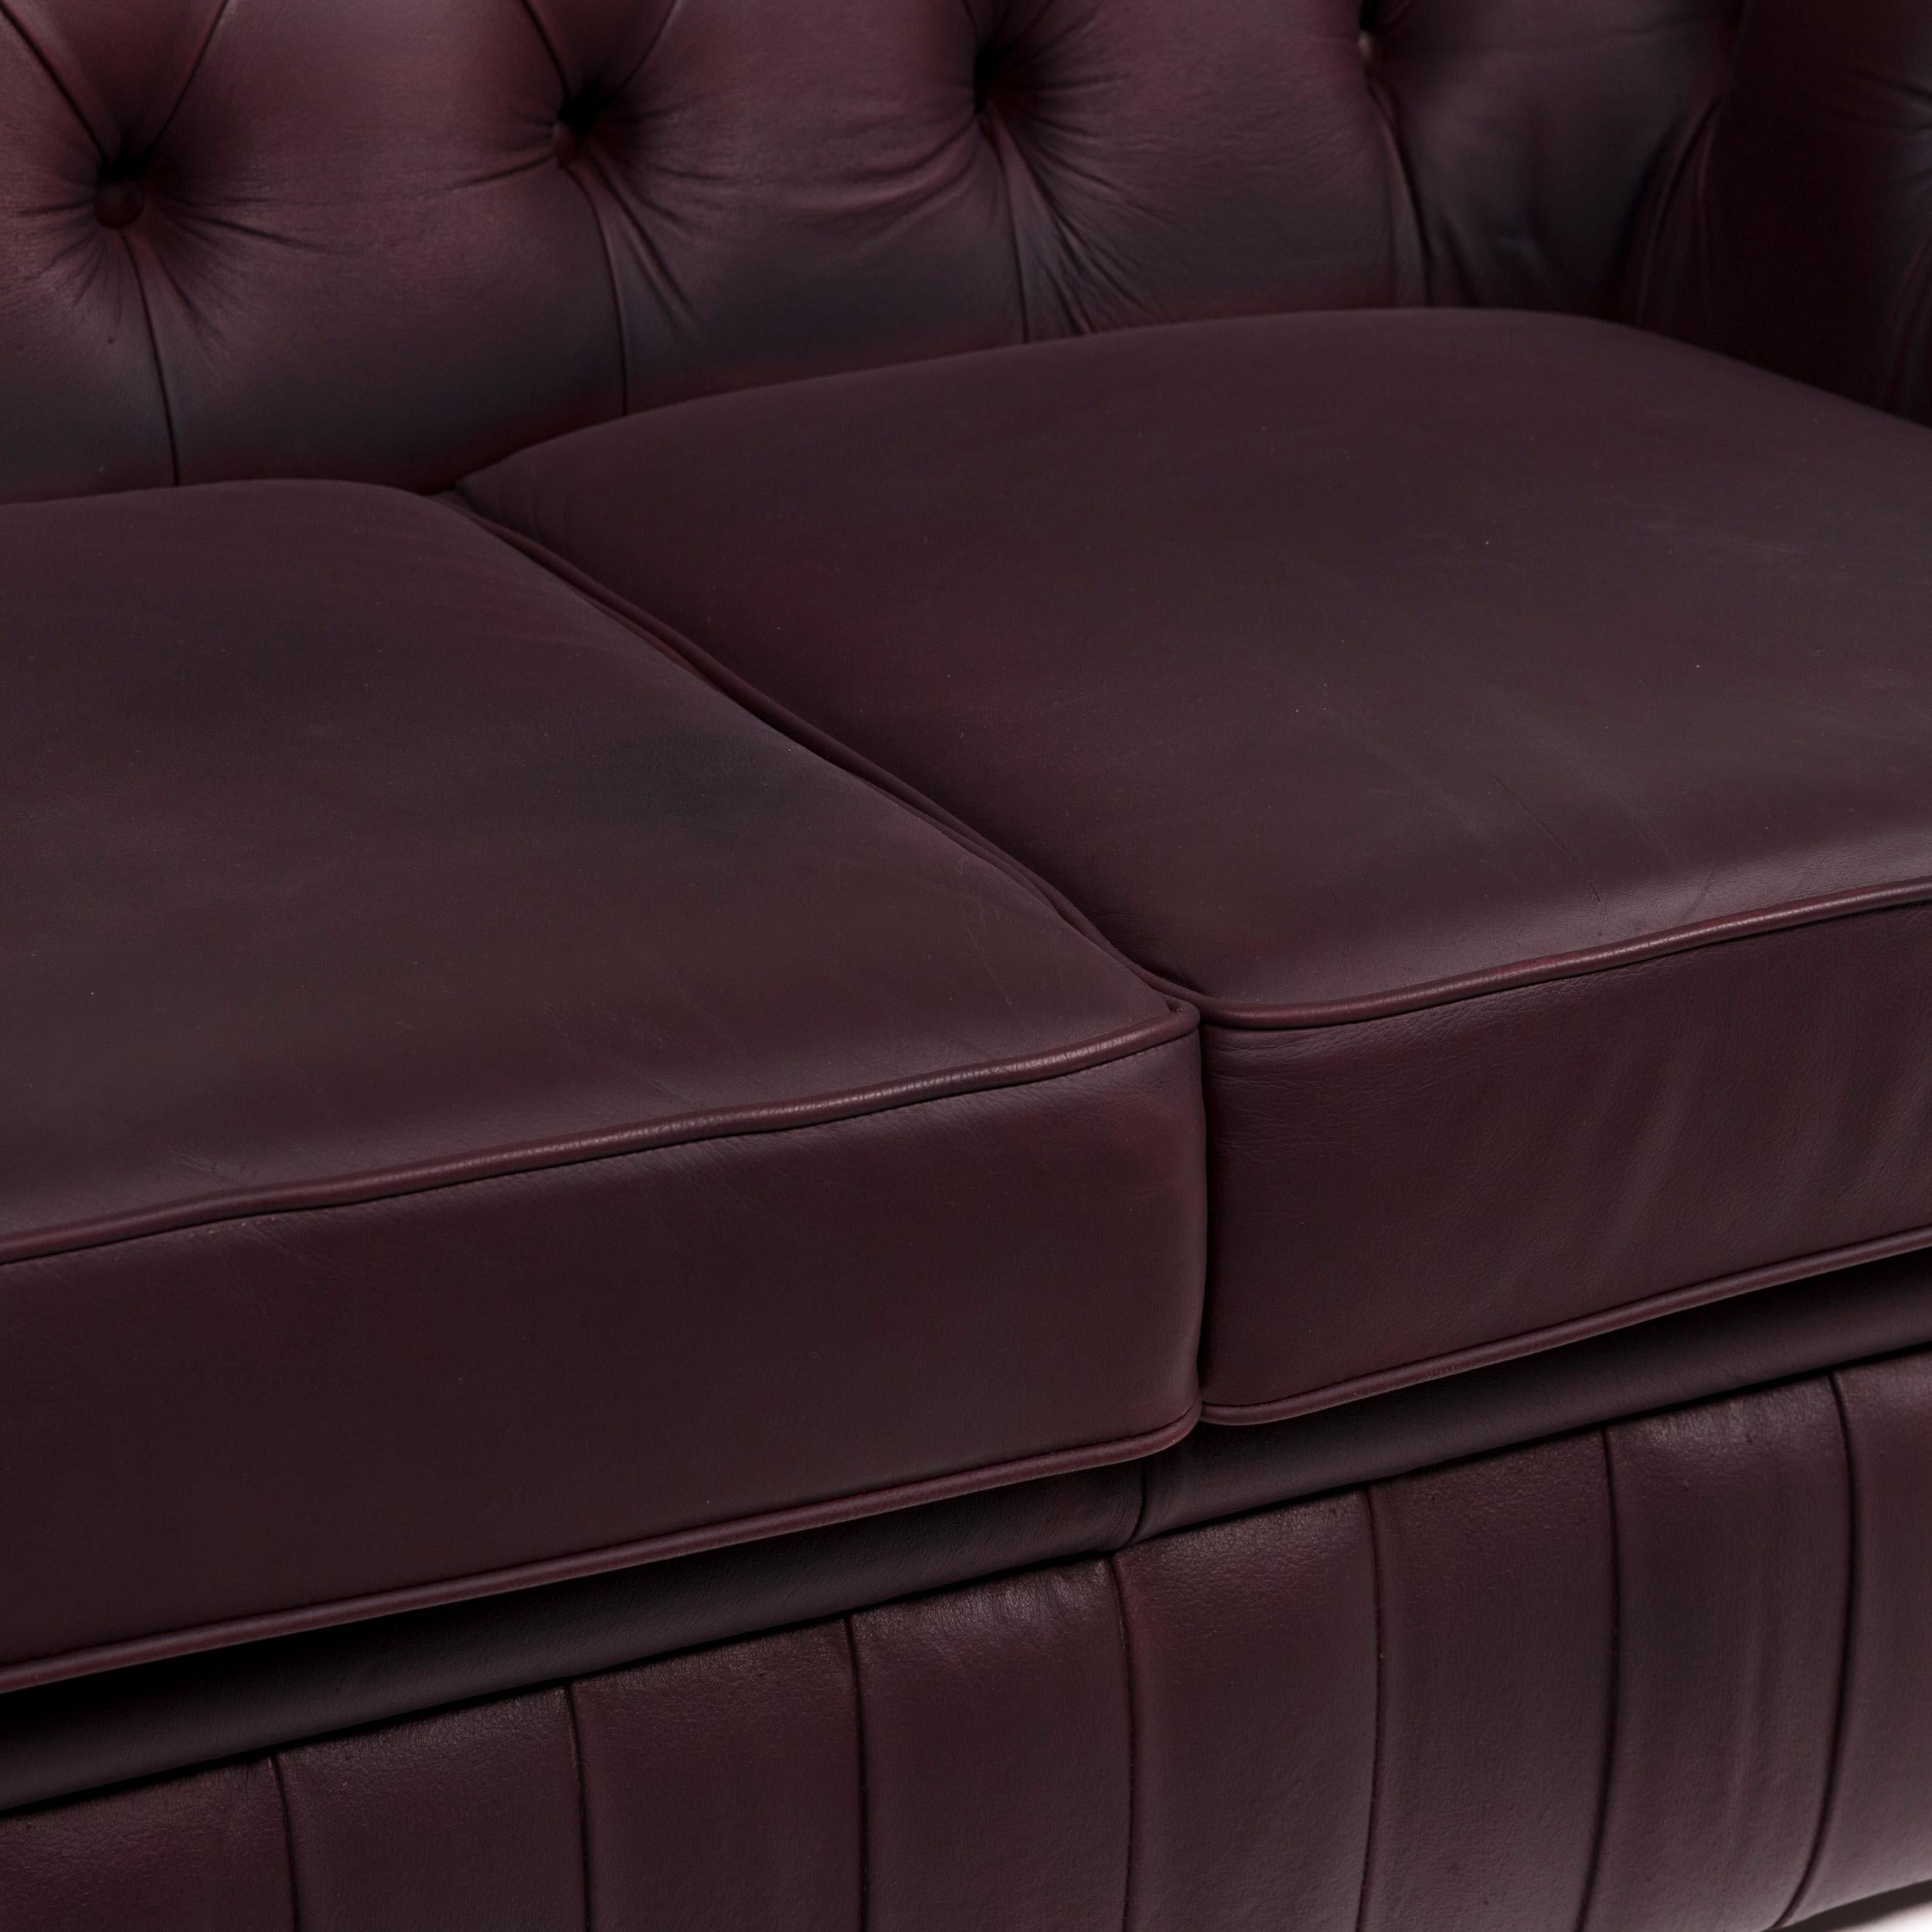 We bring to you a Chesterfield leather sofa brown purple two-seat retro couch.

 

 Product measurements in centimeters:
 

Depth 95
Width 158
Height 84
Seat-height 43
Rest-height 65
Seat-depth 55
Seat-width 95
Back-height 41.